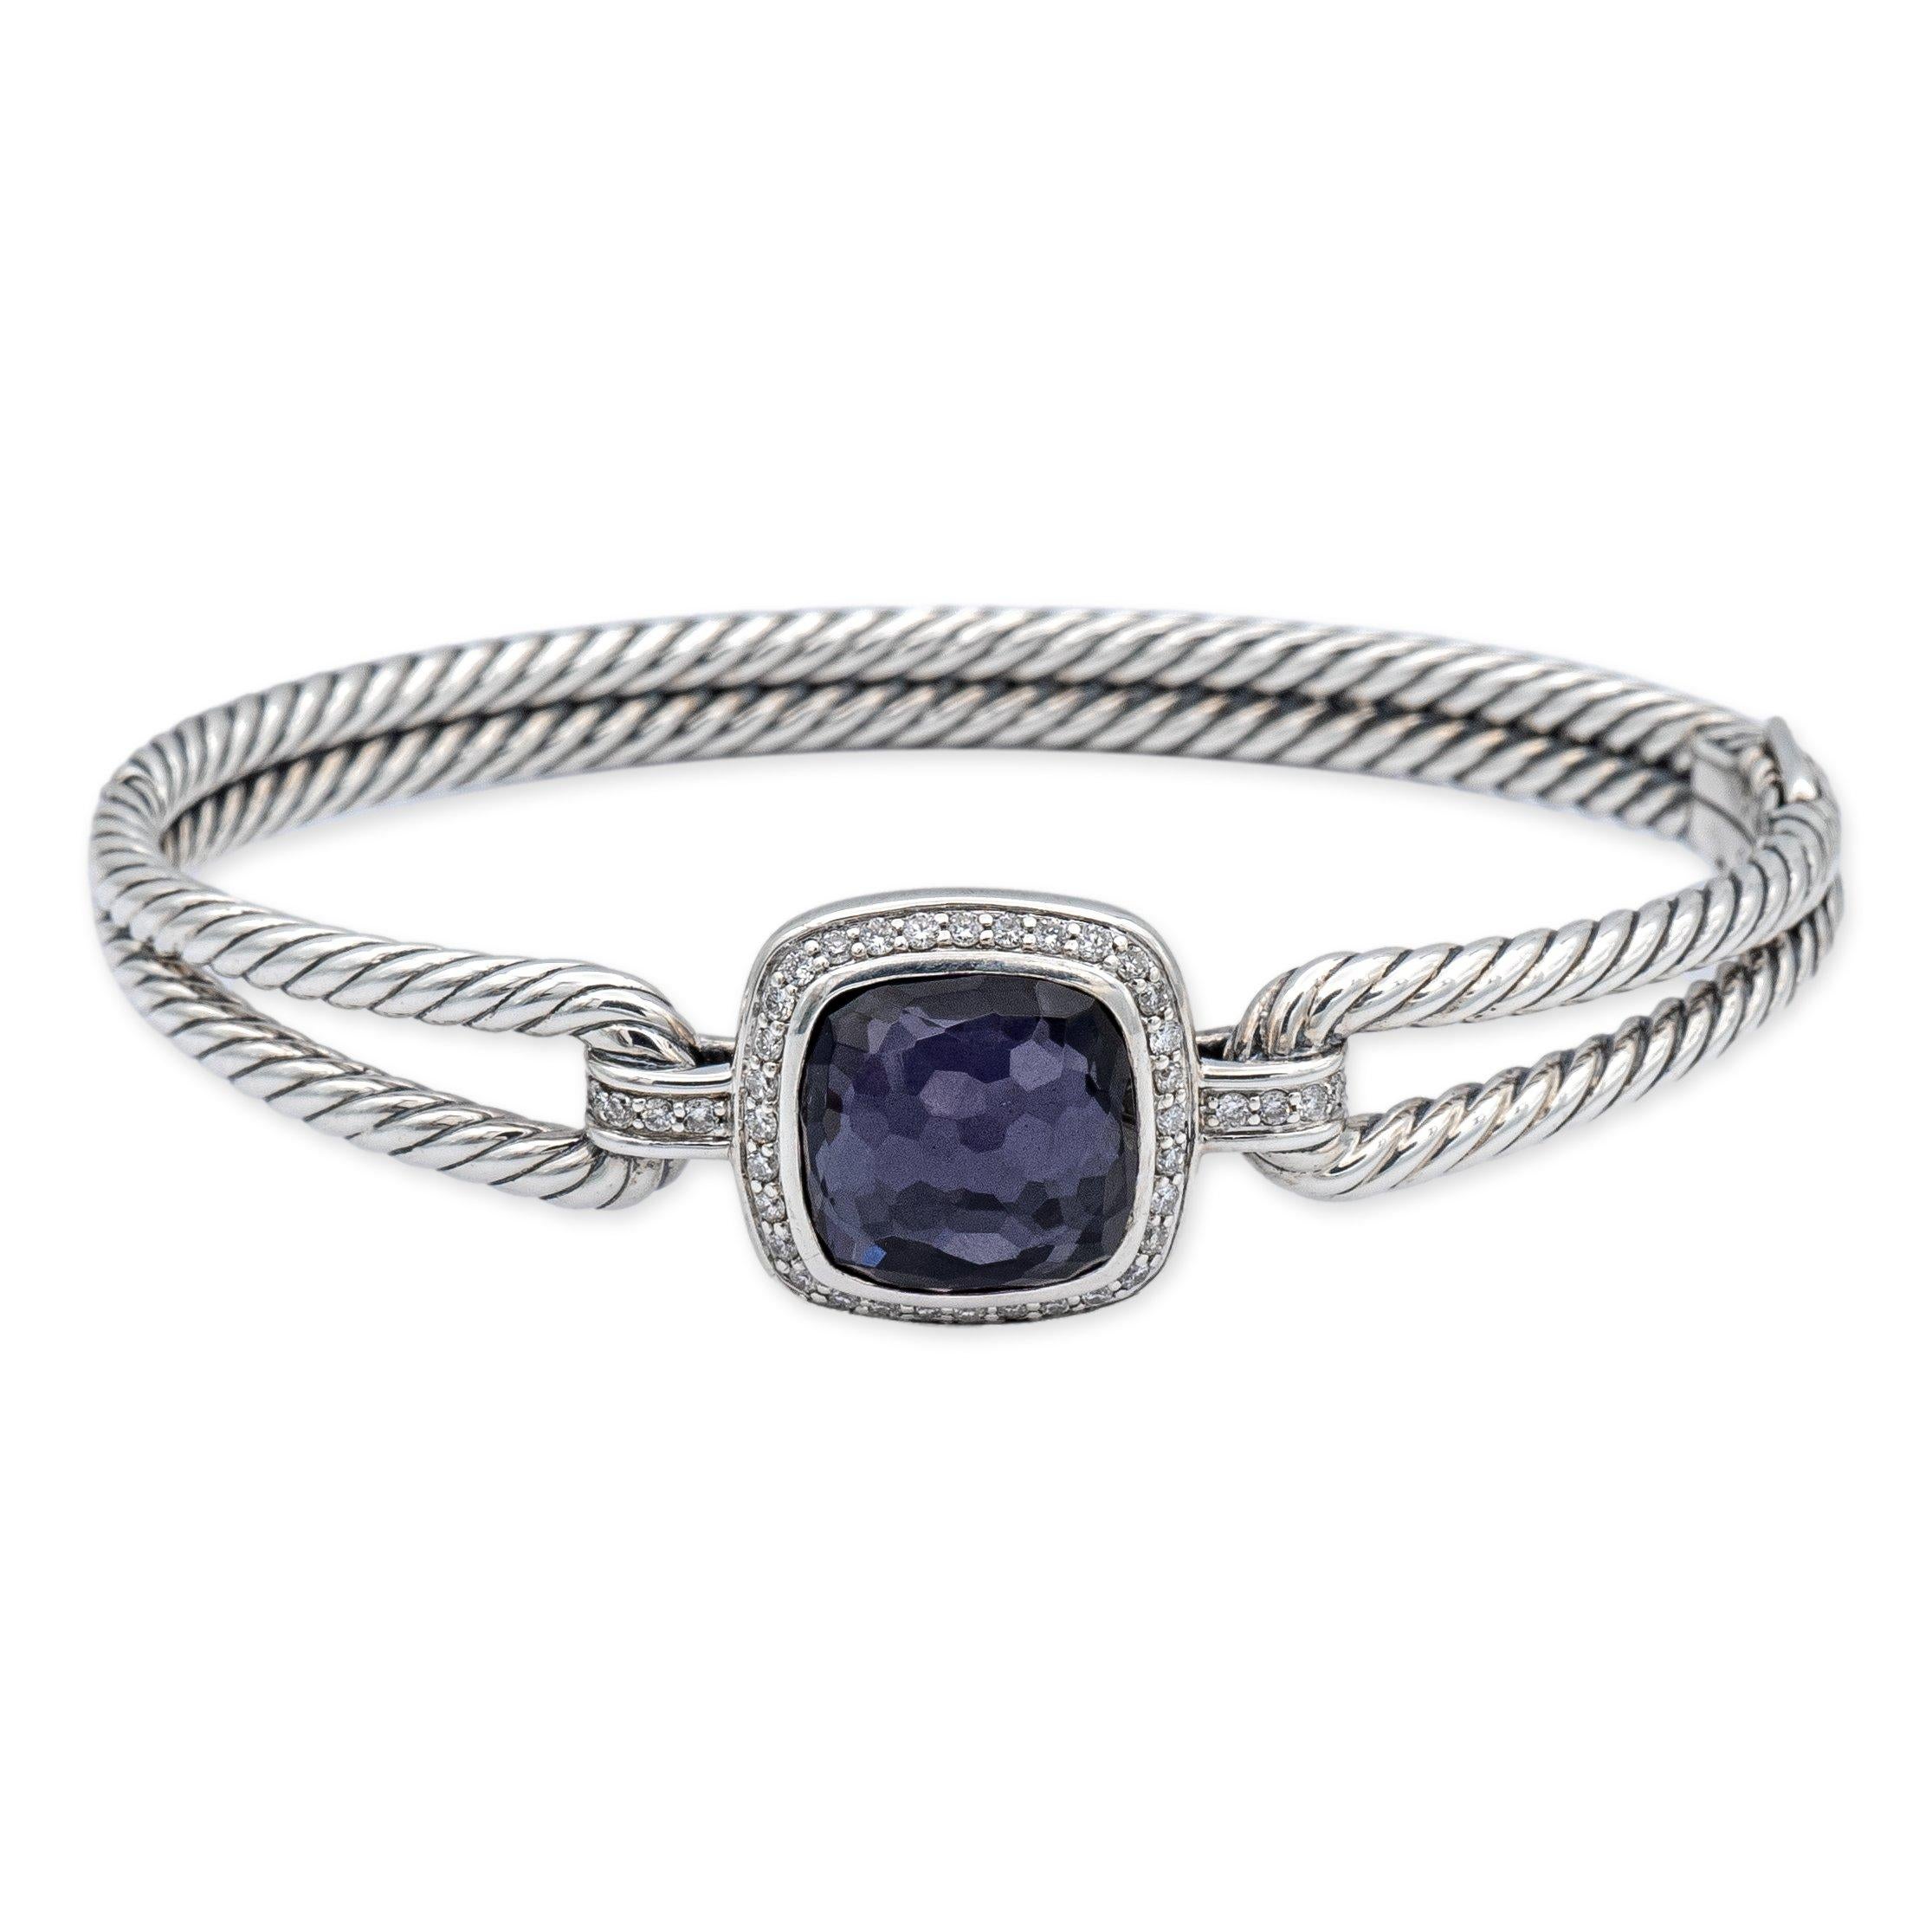 David Yurman signature cuff bracelet from The Albion® Collection’s finely crafted in sterling silver featuring a unique cushion-cut center stone defined by David Yurman as a Faceted black orchid (Lavender Amethyst backed with Hematite) adorned with